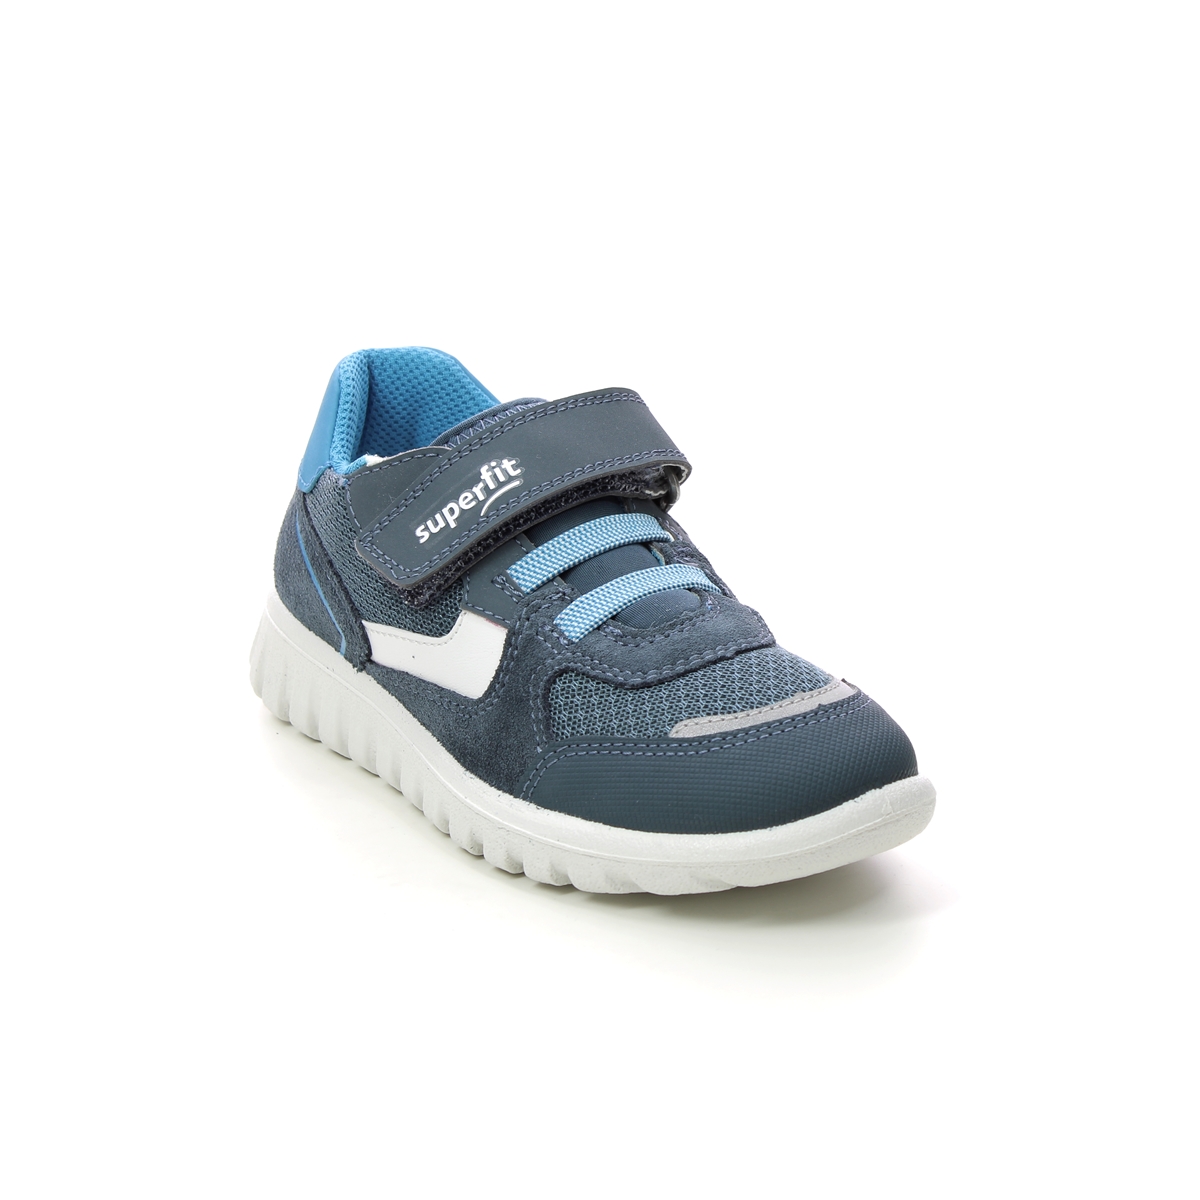 Superfit Sport7 Mini Bungee Navy Kids Trainers 1006195-8030 In Size 27 In Plain Navy For kids